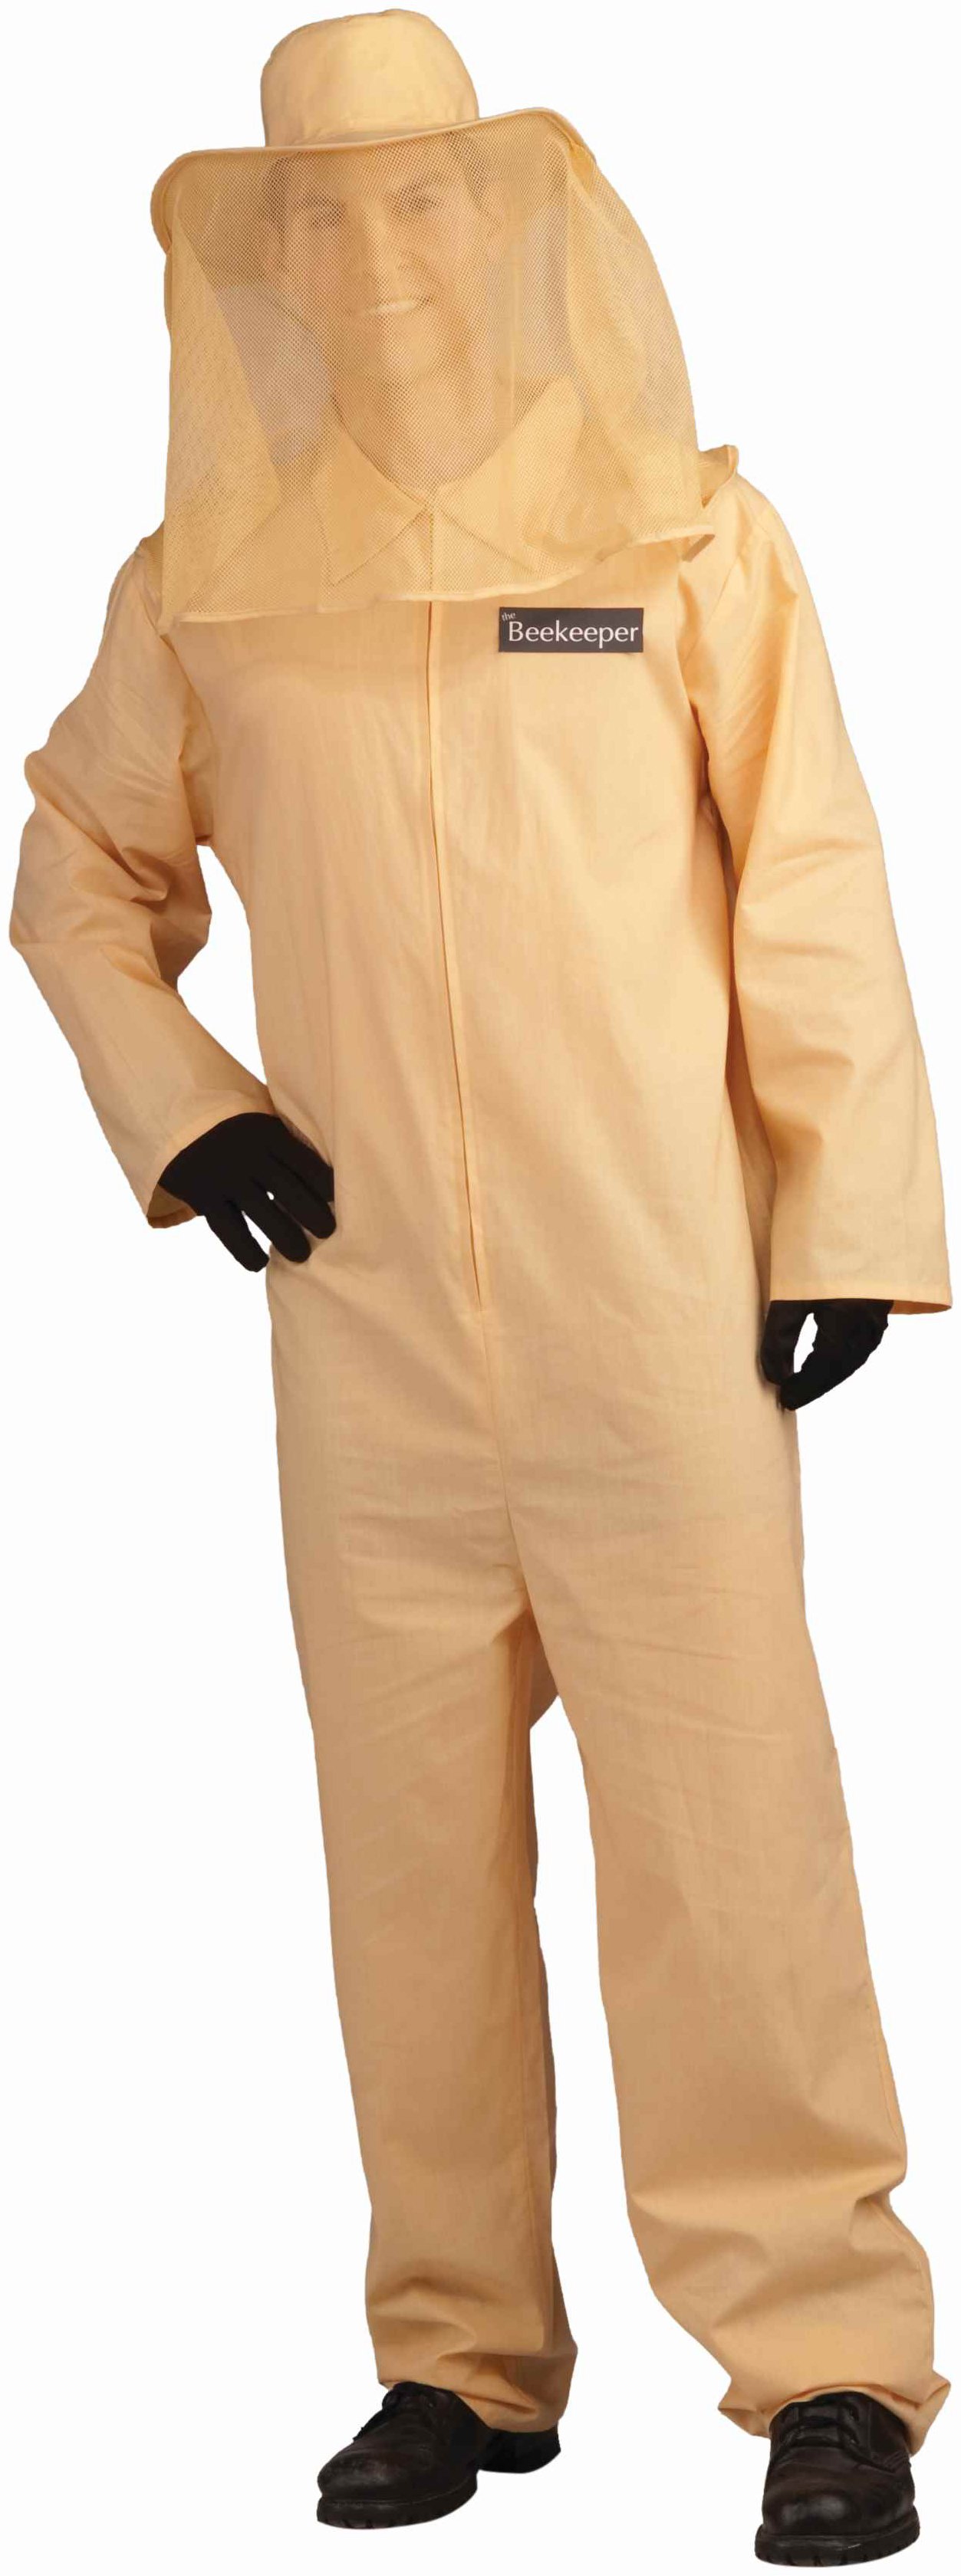 Bee Keeper Adult Costume - Click Image to Close